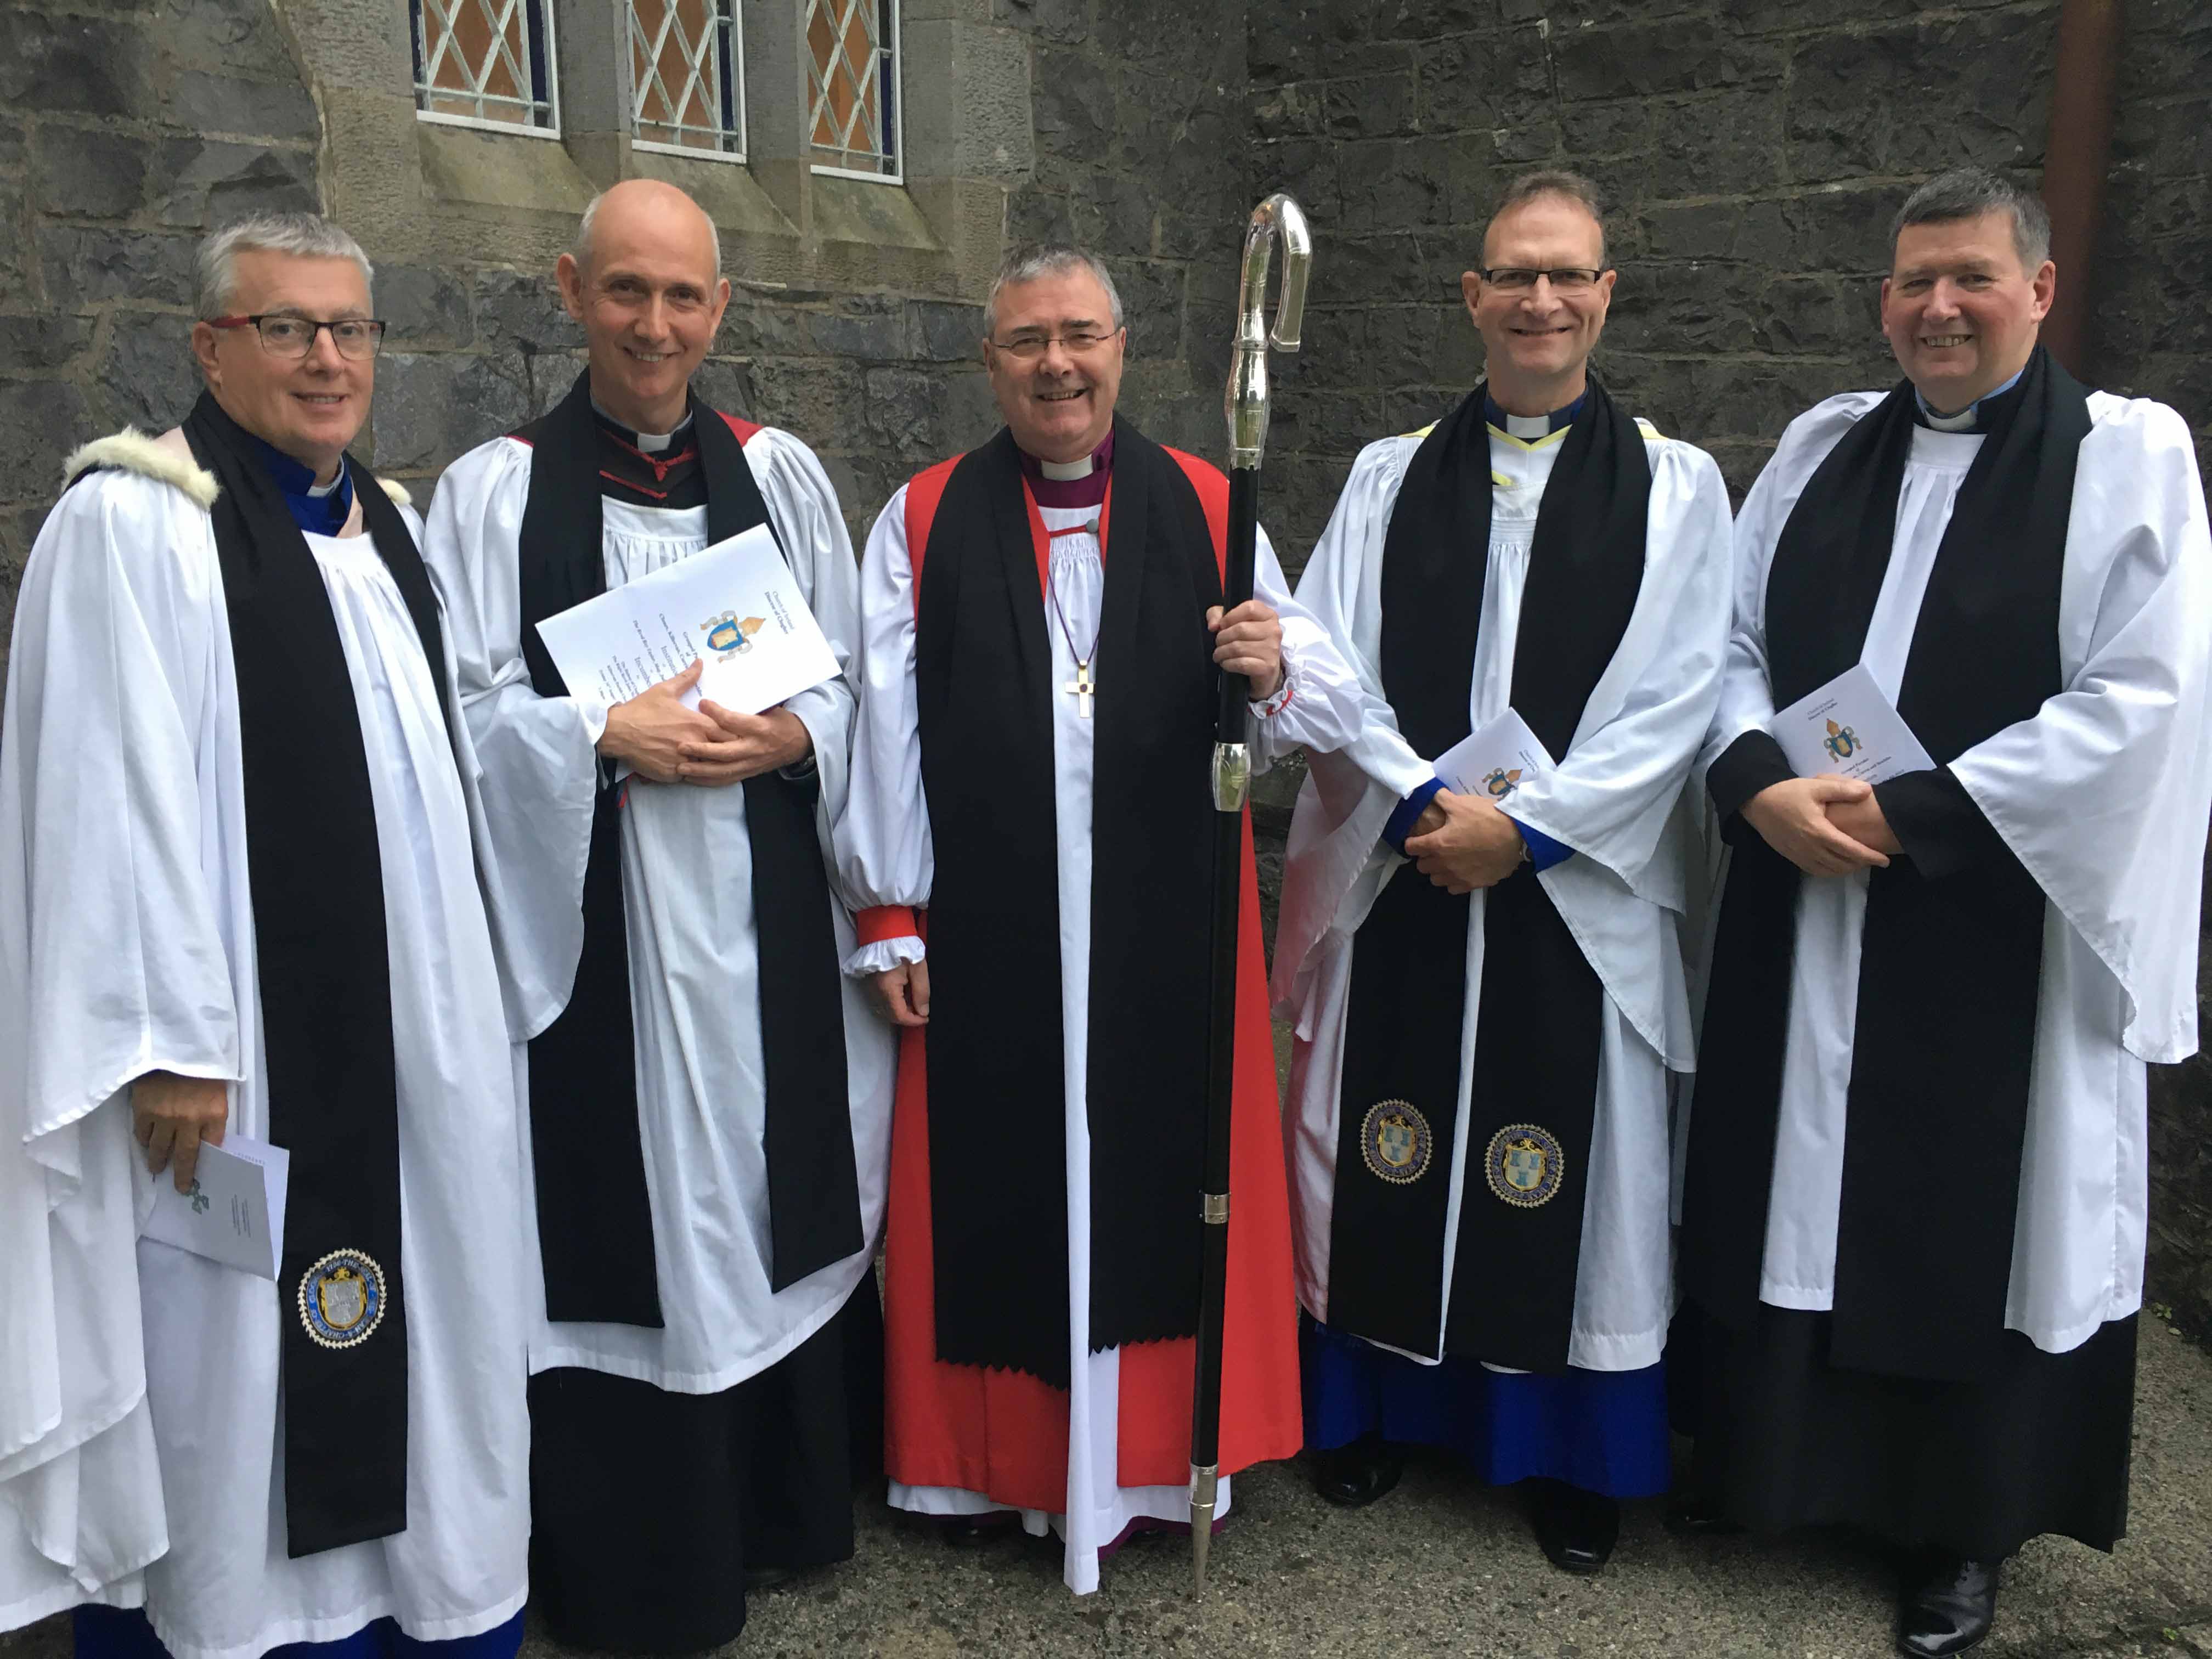 At the institution of the Revd Roy Taylor (second left) as Rector of the Grouped Parishes of Clones, Killeevan, Currin and Newbliss are (from left); Archdeacon Brian Harper, the Bishop of Clogher, the Right Revd John McDowell; Dean Kenneth Hall and the Revd Alan Capper.